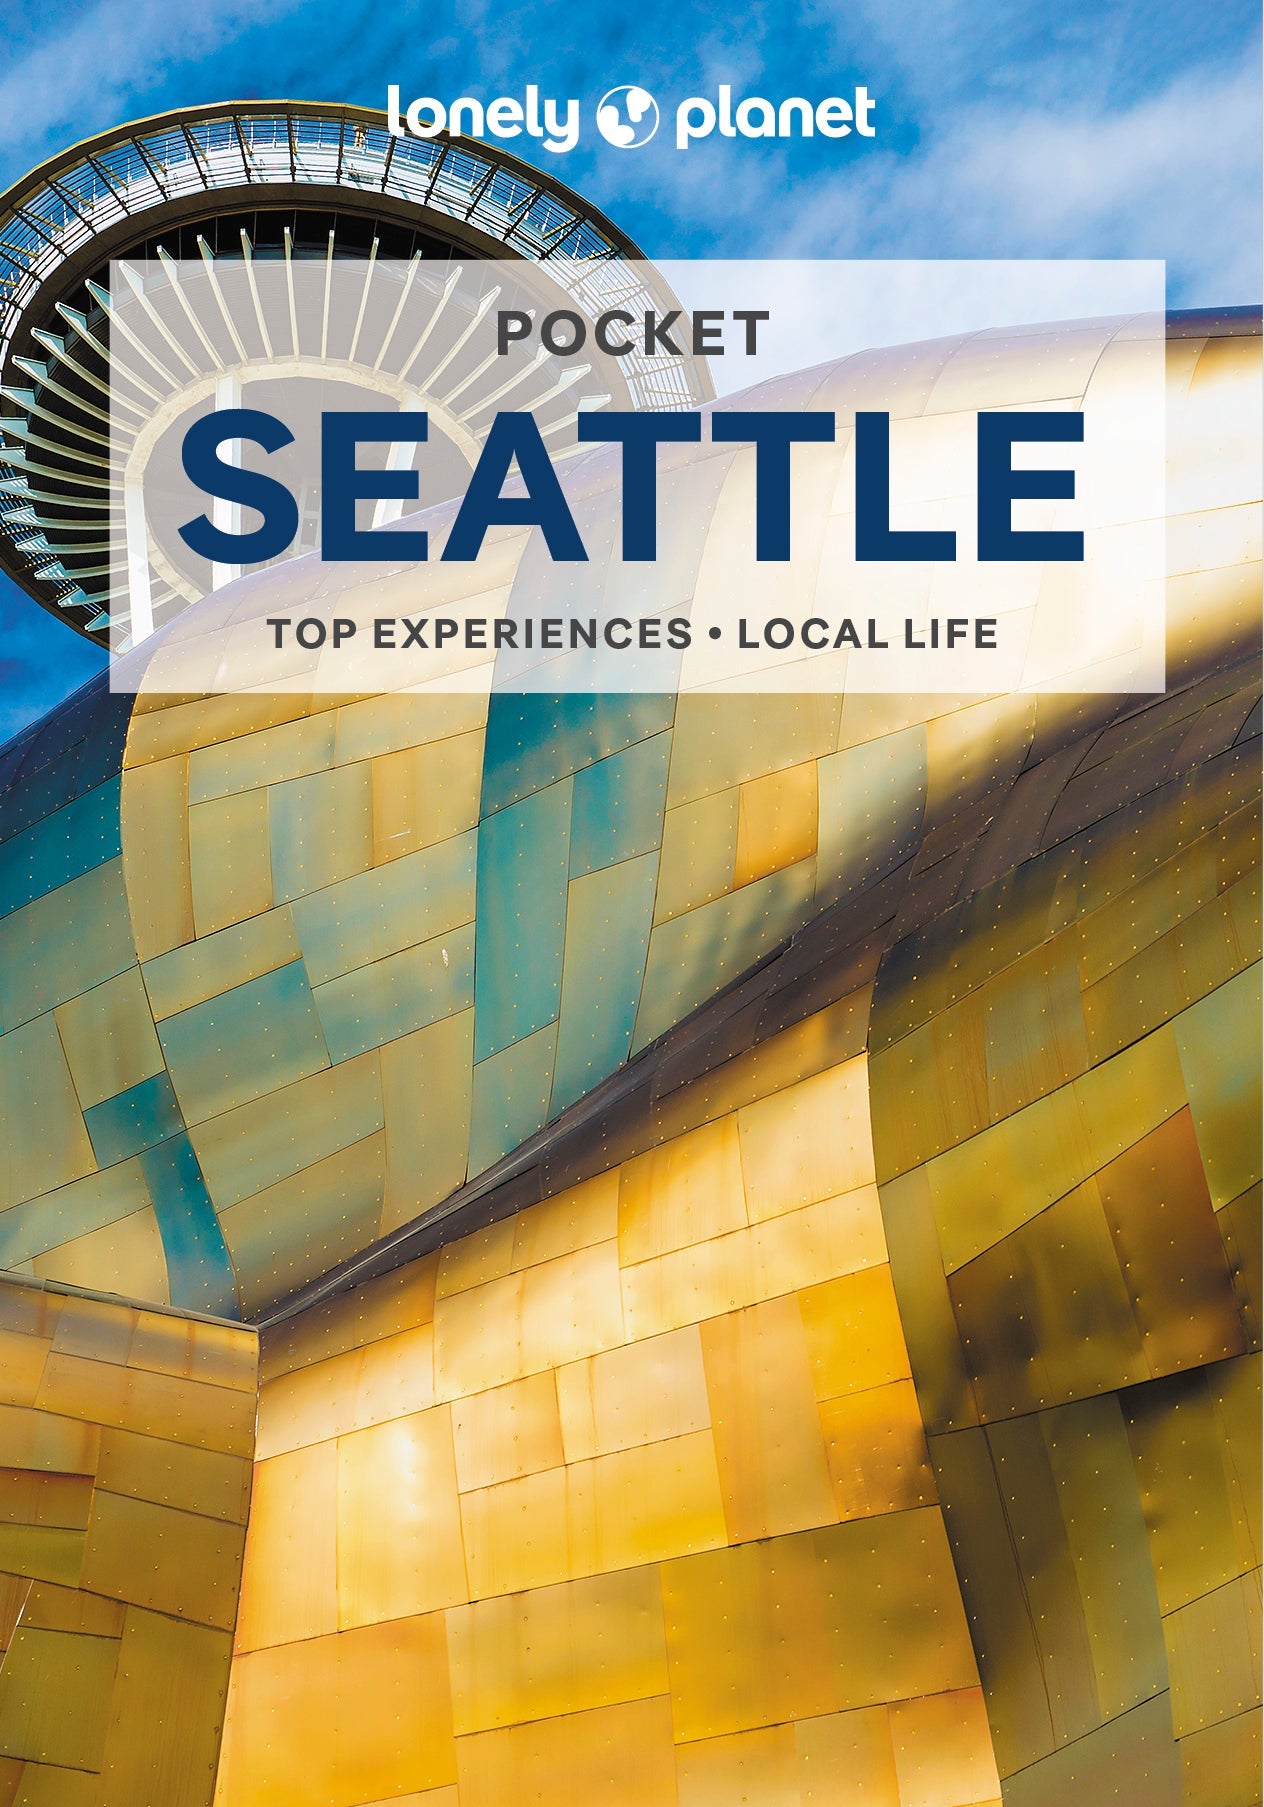 pocket-seattle-lonely-planet